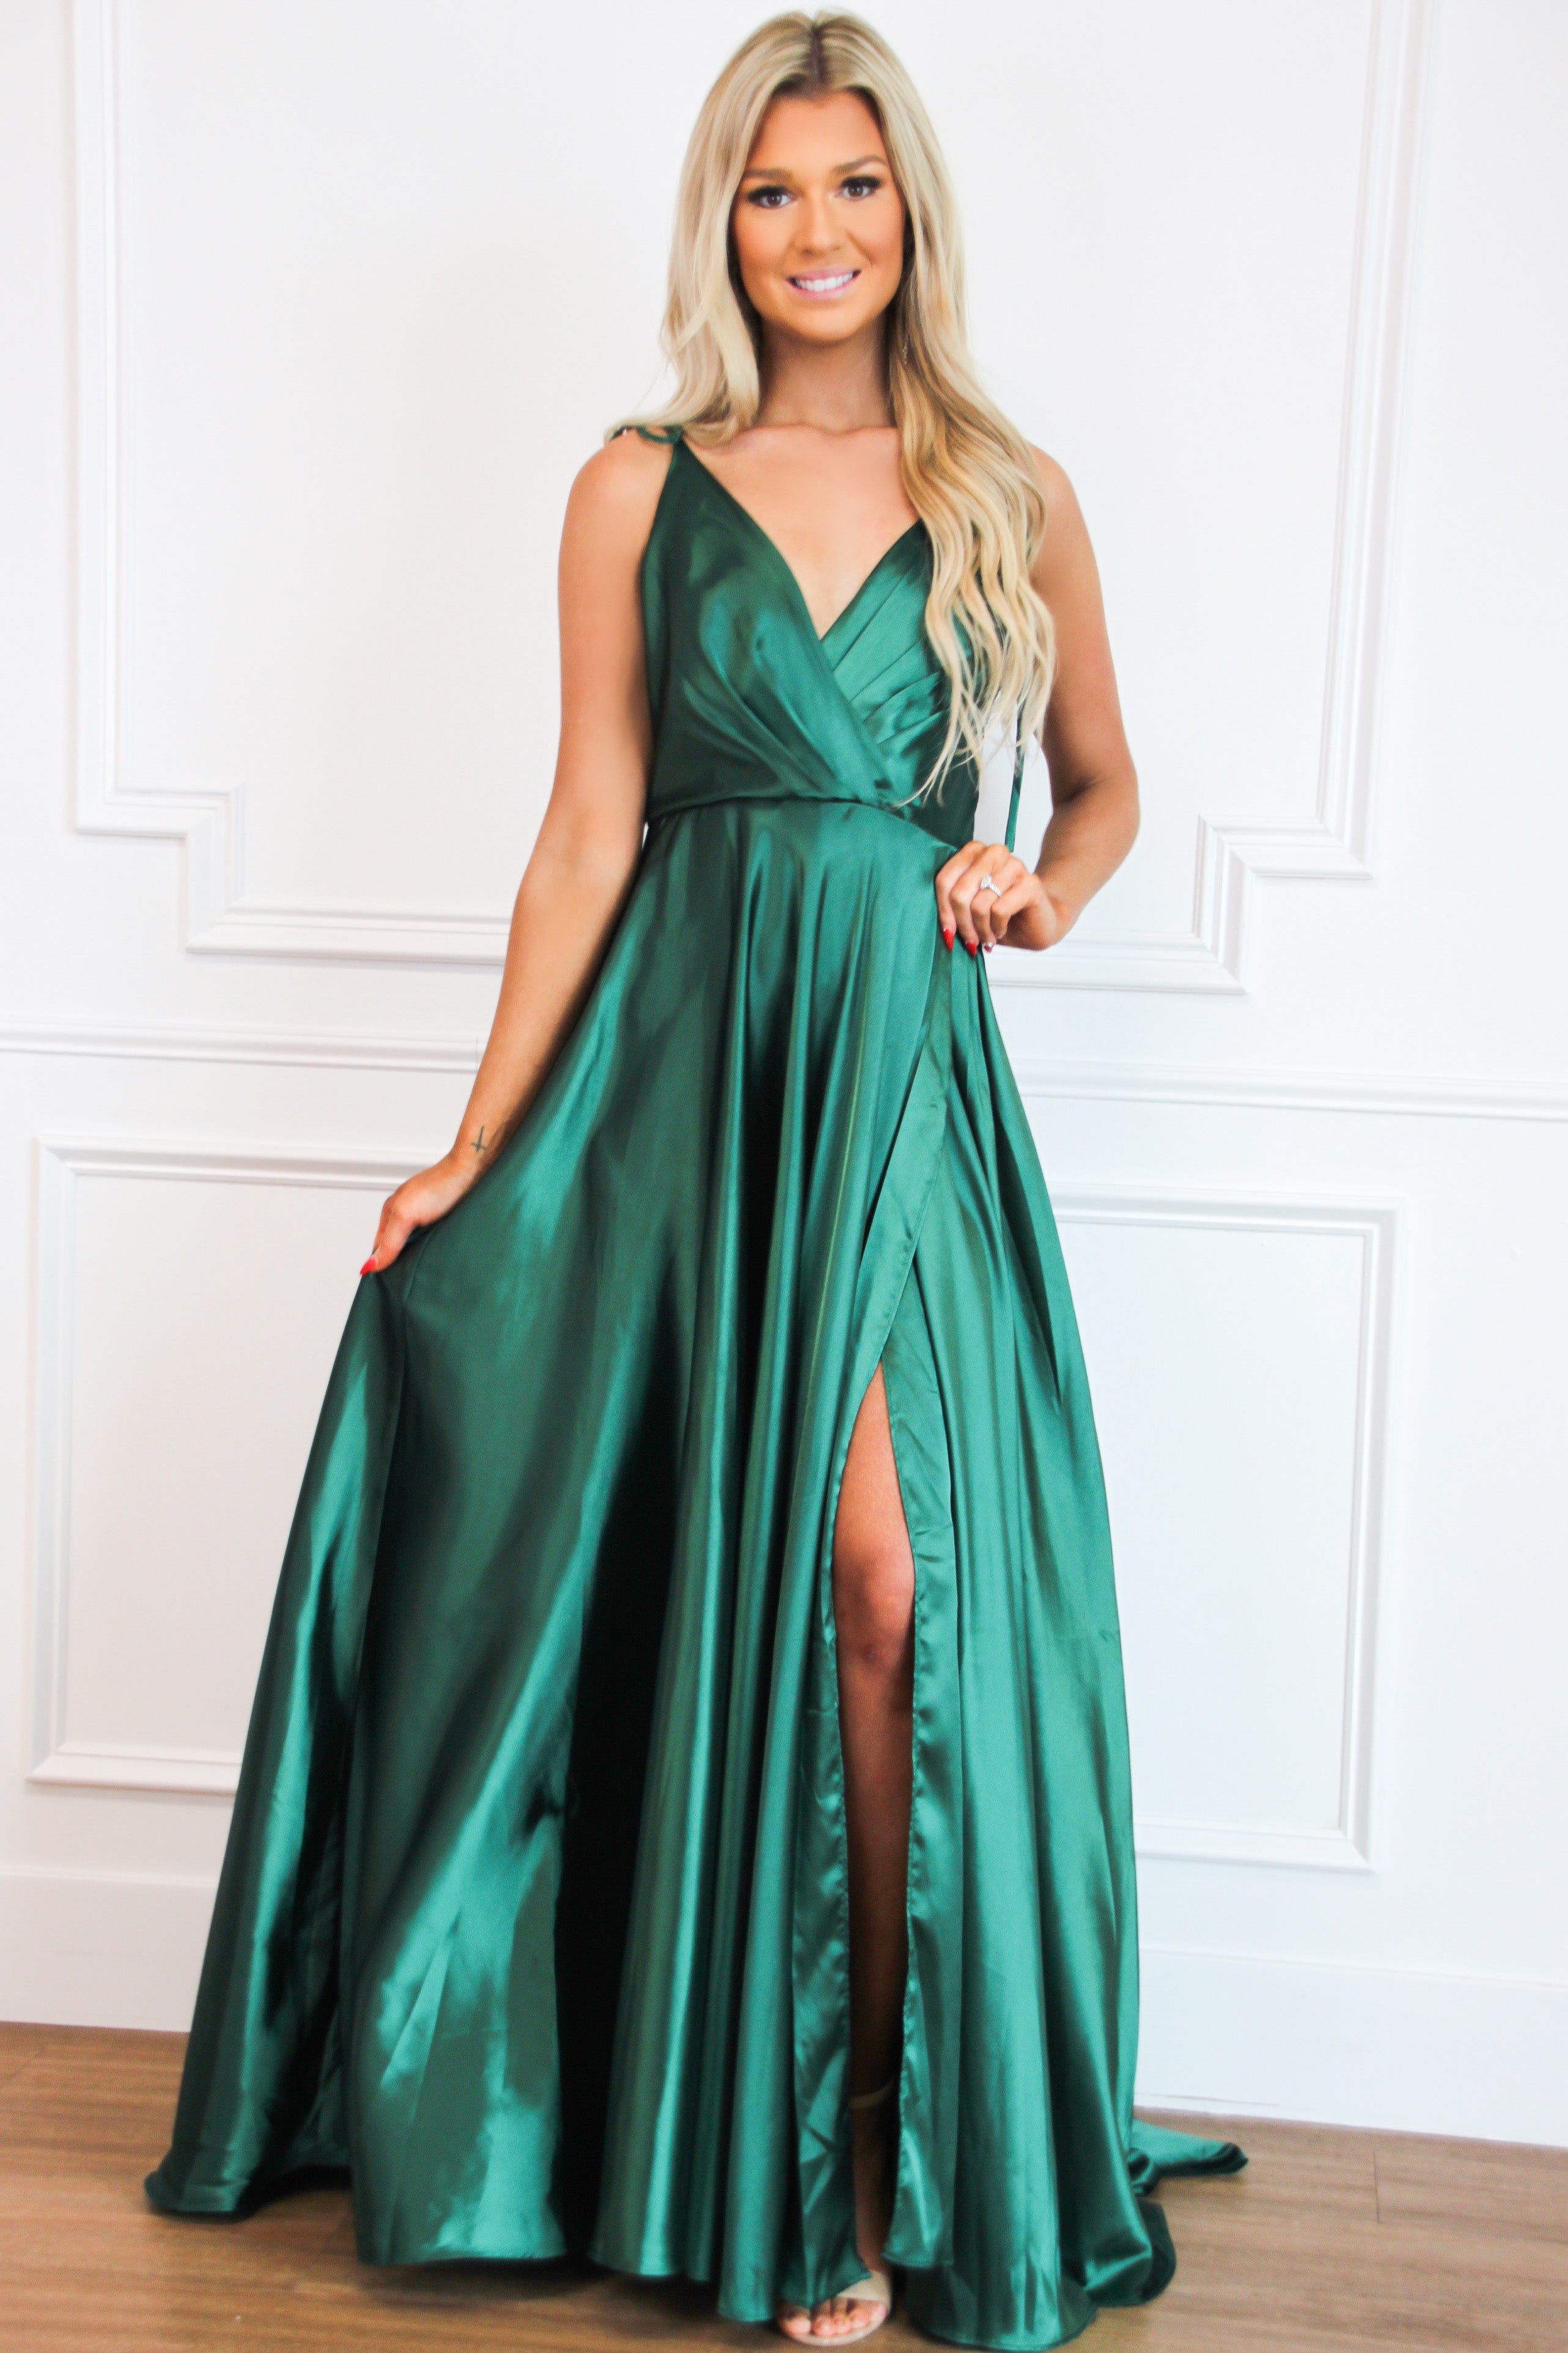 Bella and Bloom Boutique - Born to Love You Satin Slit Formal